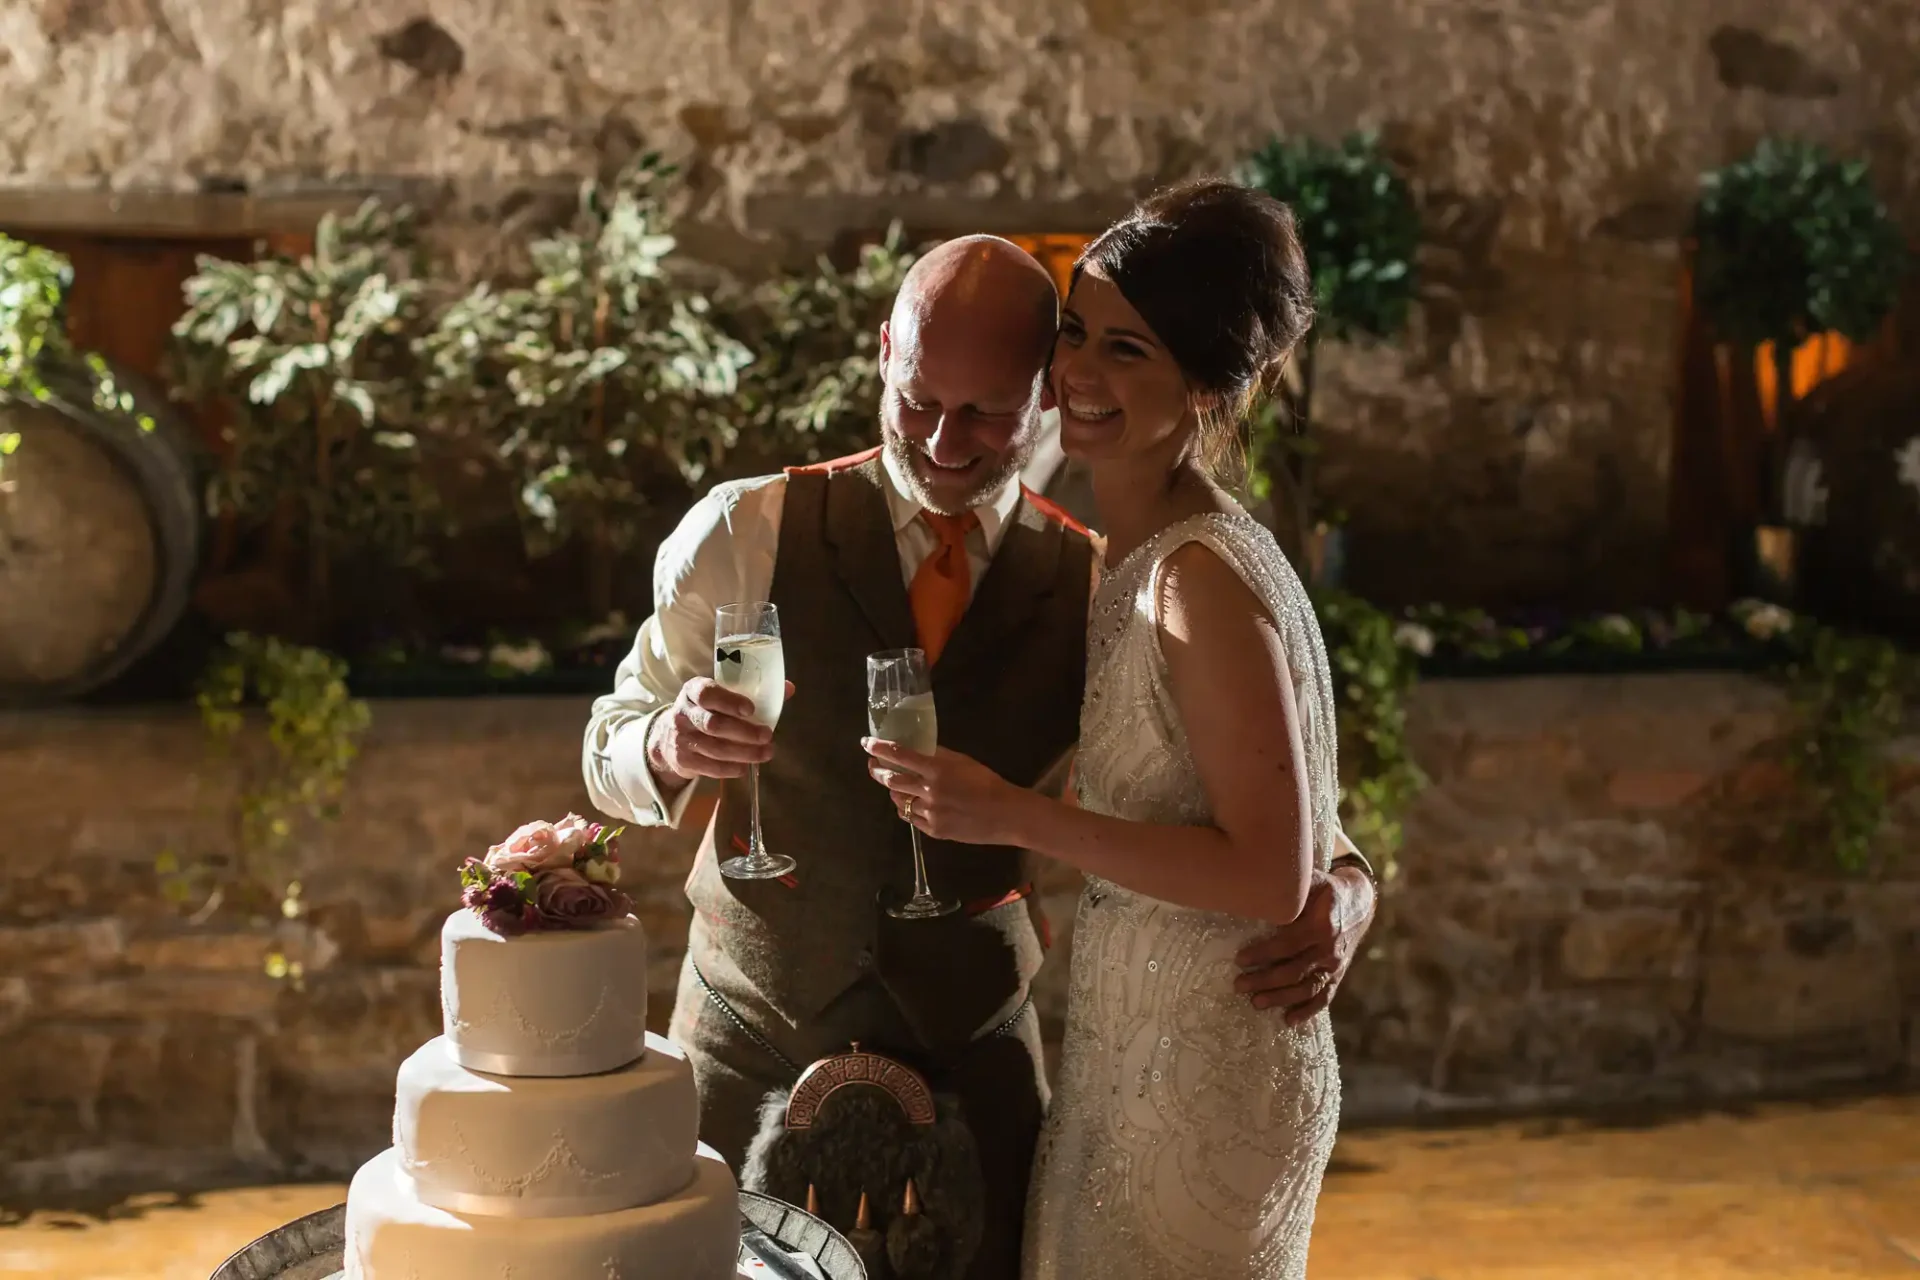 A bride and groom smiling and toasting with champagne glasses beside a wedding cake in a rustic venue lit by warm lights.